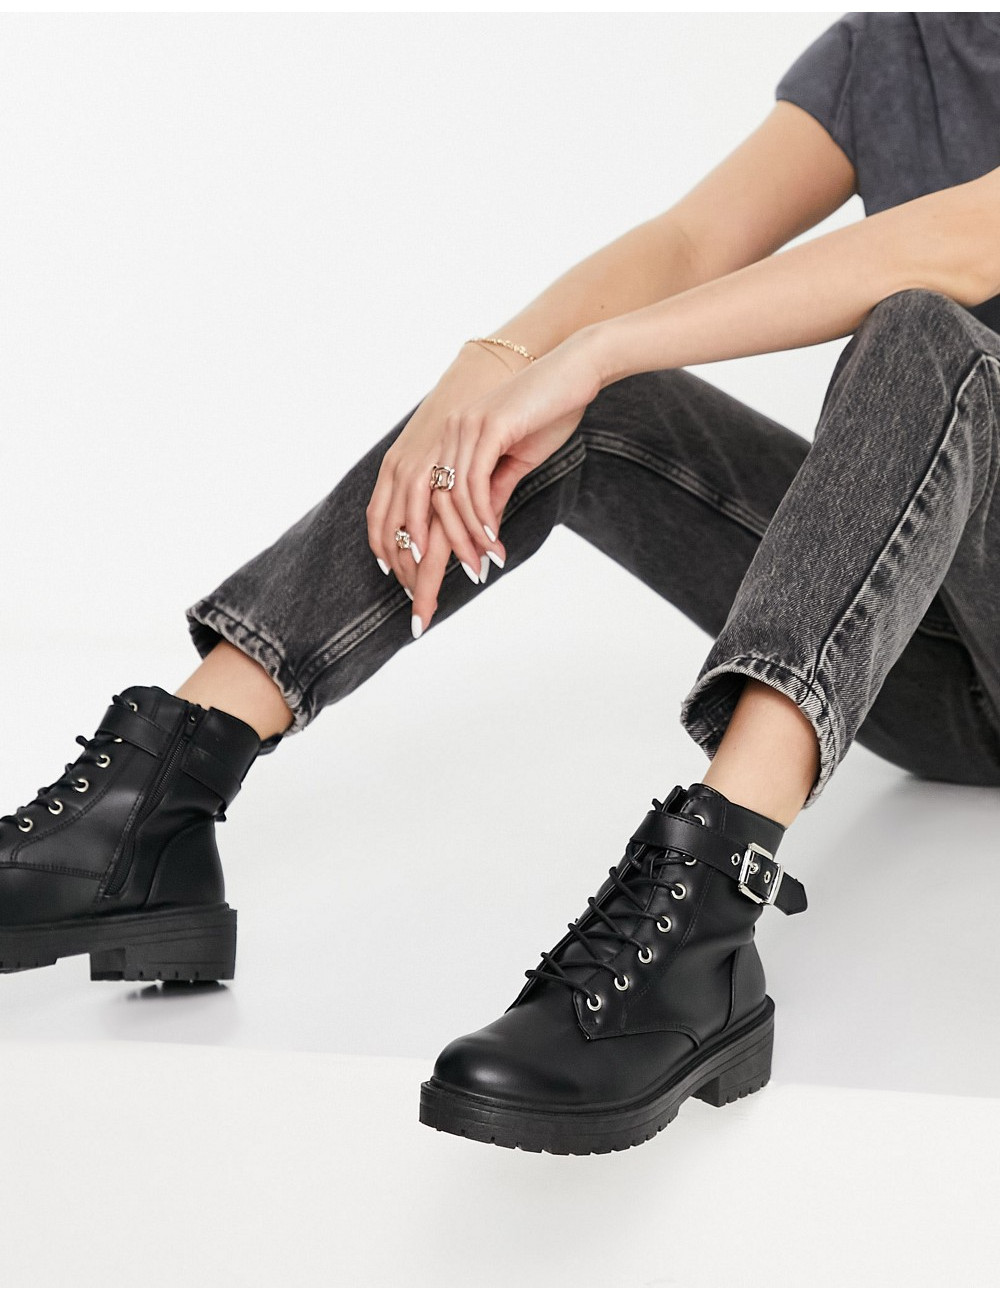 New Look lace up boot in black